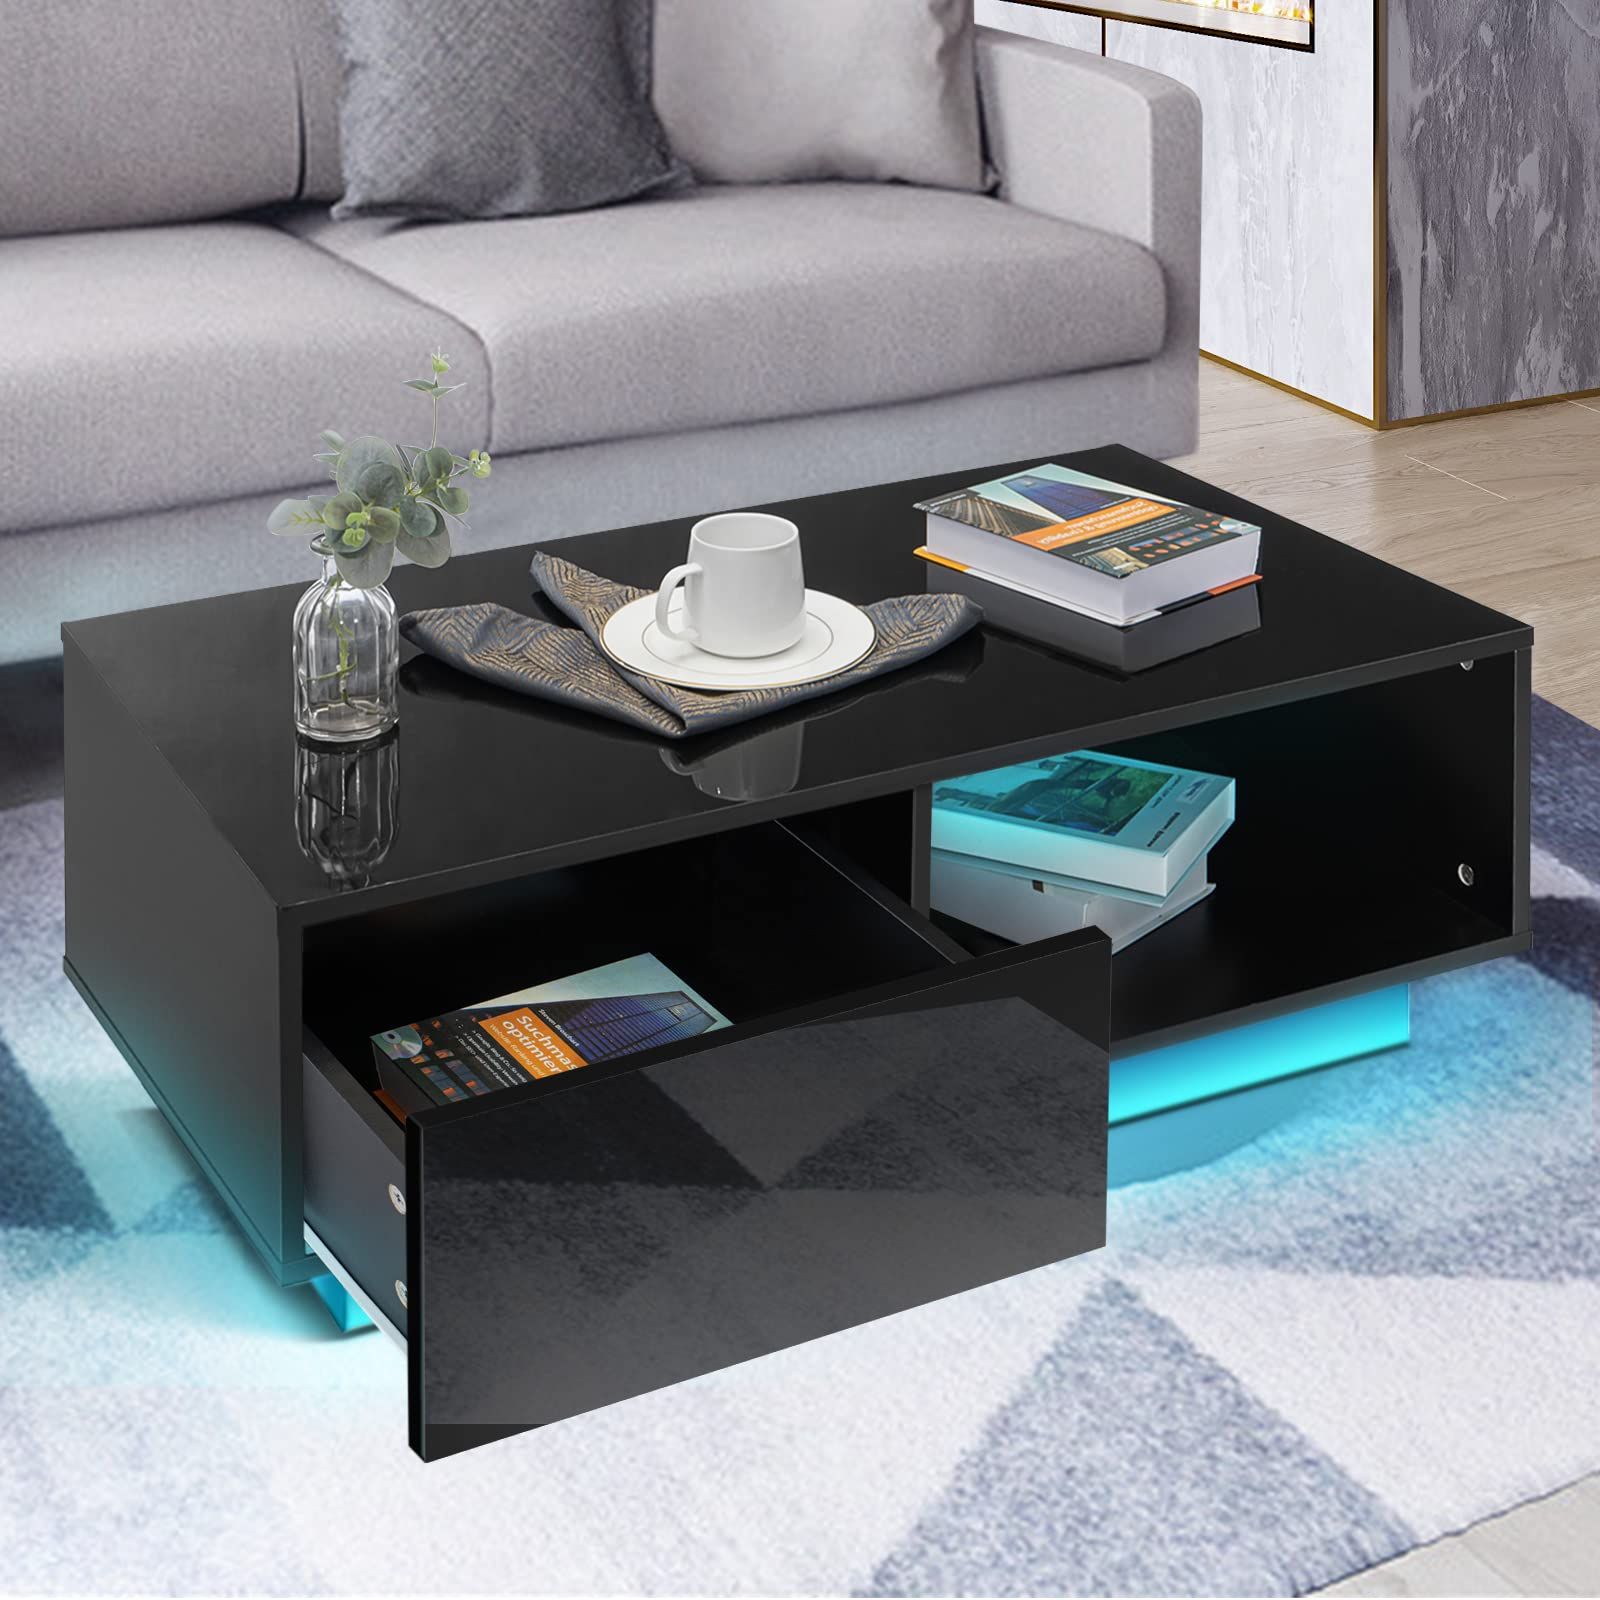 Led Coffee Tables With 4 Drawers Intended For 2020 Hommpa Led Coffee Tables For Living Room Modern Coffee Table With (View 14 of 15)